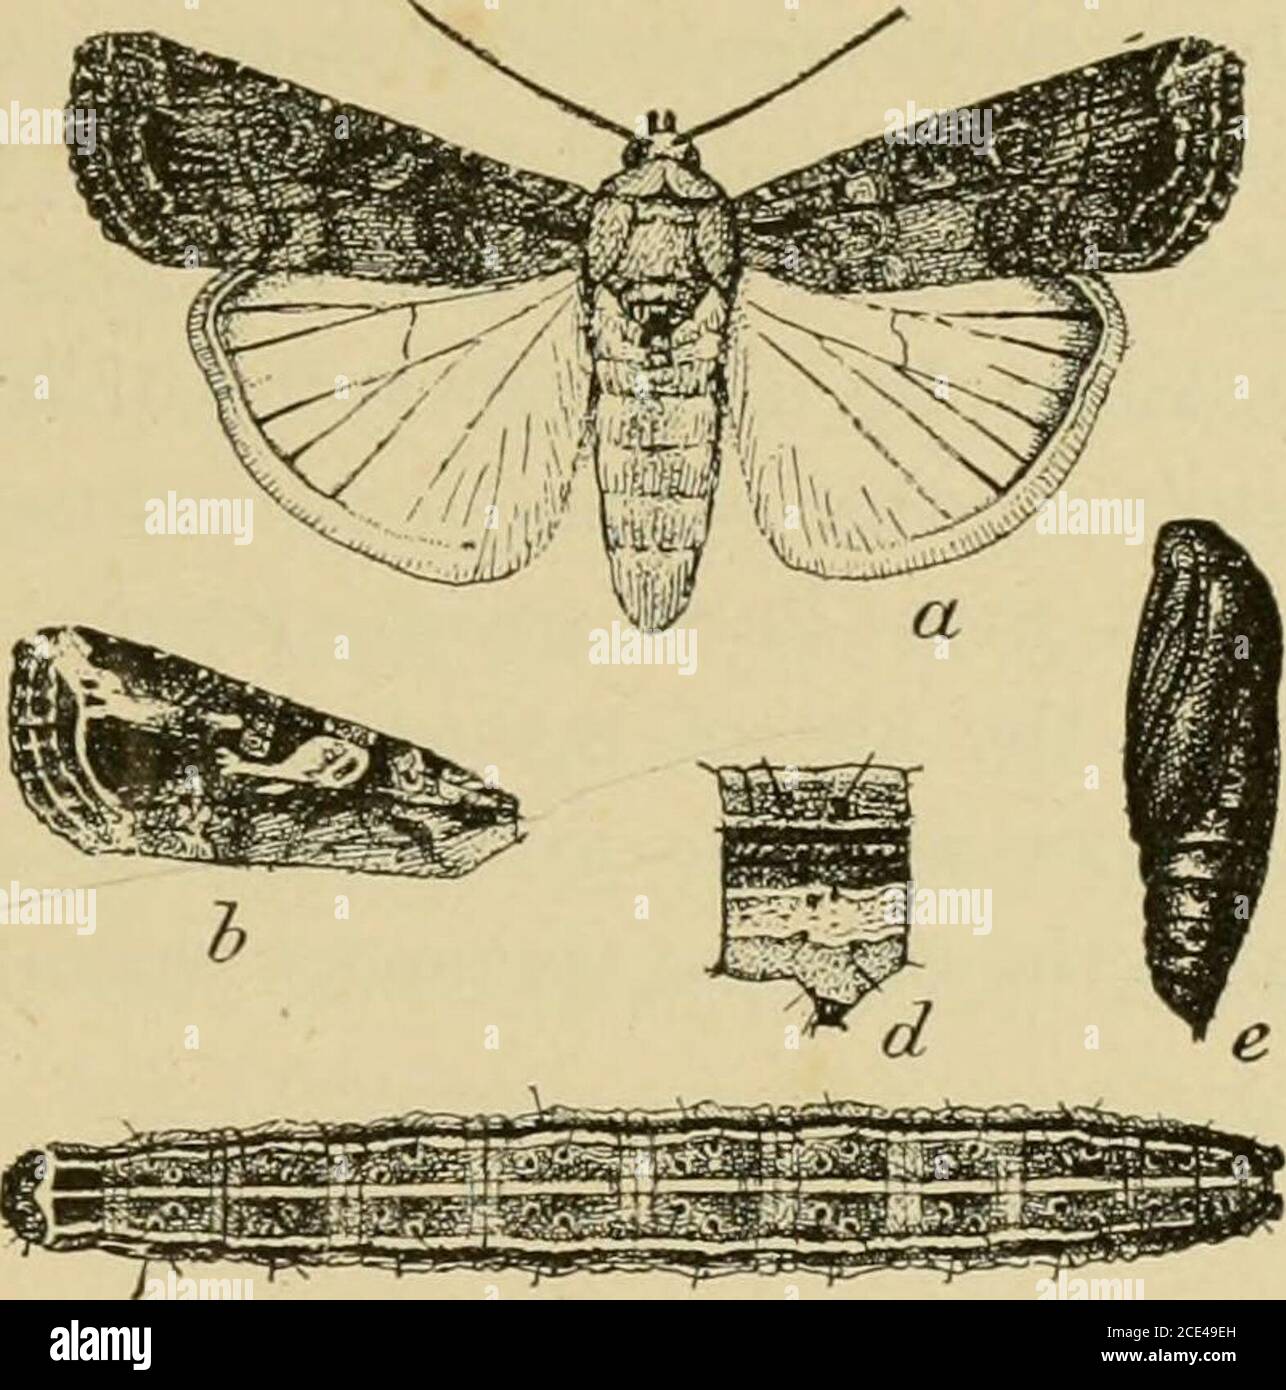 . Insect pests of farm, garden and orchard . e difficult to combat. Life History.—The winter is passed in the pupal state, thepupffi being about one-halfinch long and being foundin cells one-quarter to one-half an inch below the sur-face. The moths emergein the spring and thefemales lay their eggs ongrass in clusters of fifty ormore, each mass beingcovered with the mouse-colored hairs from the bodyof the female. The eggshatch in about ten daysand the caterpillars arefound during May andJune. The complete lifehistory of the insect hasnot been carefully followed,but it seems probable thatthere a Stock Photo